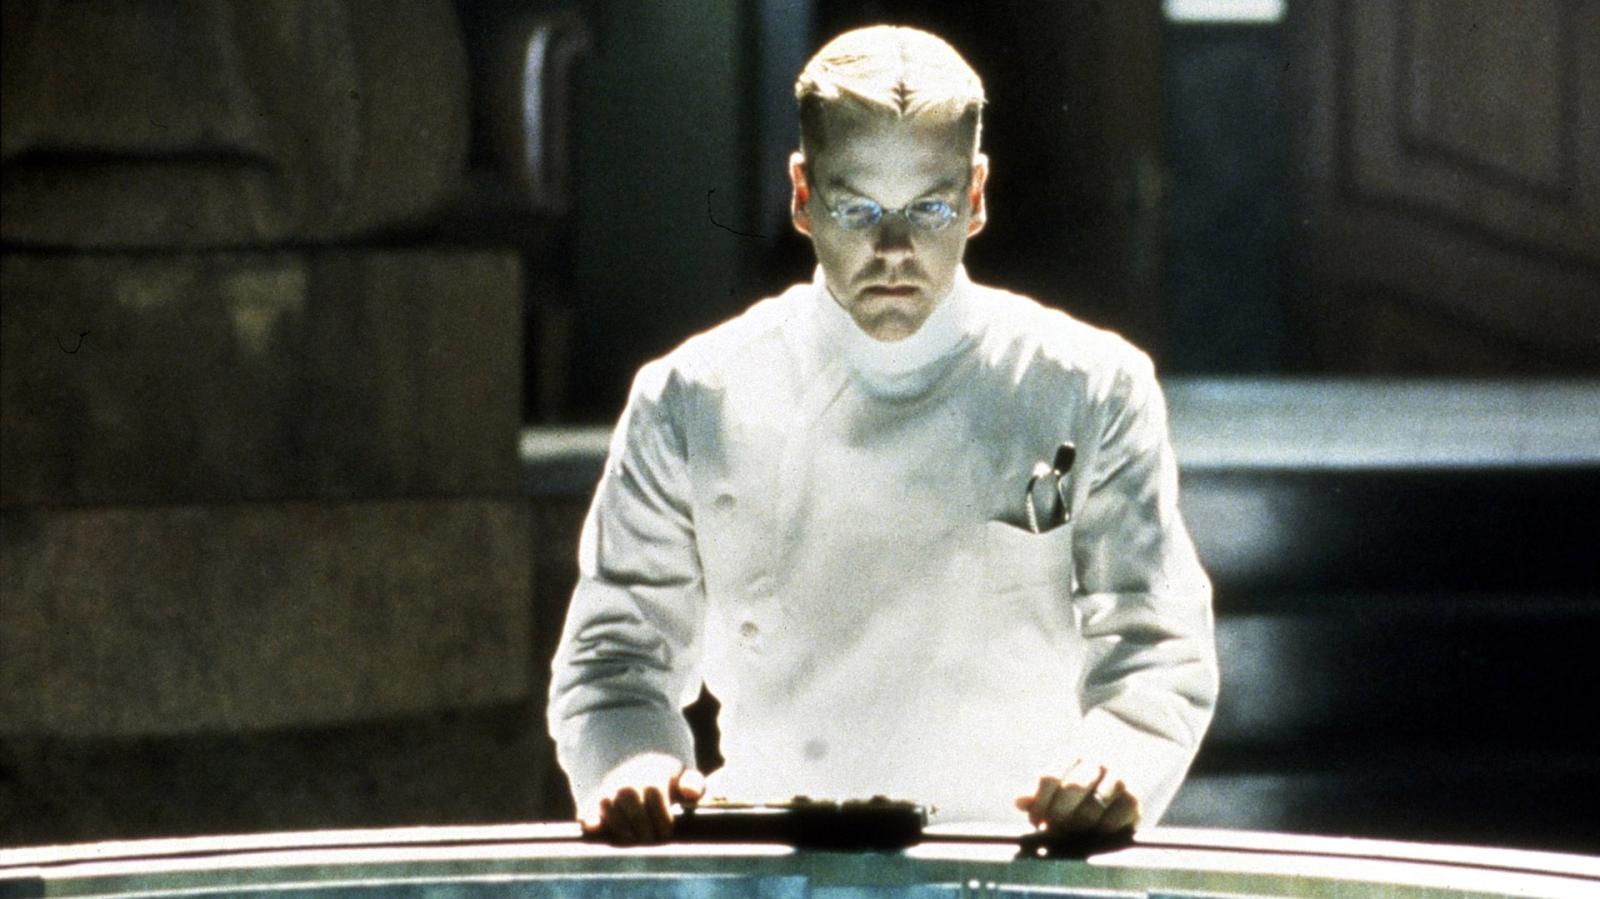 10 Underrated Kiefer Sutherland Movies That Deserve More Credit - image 2